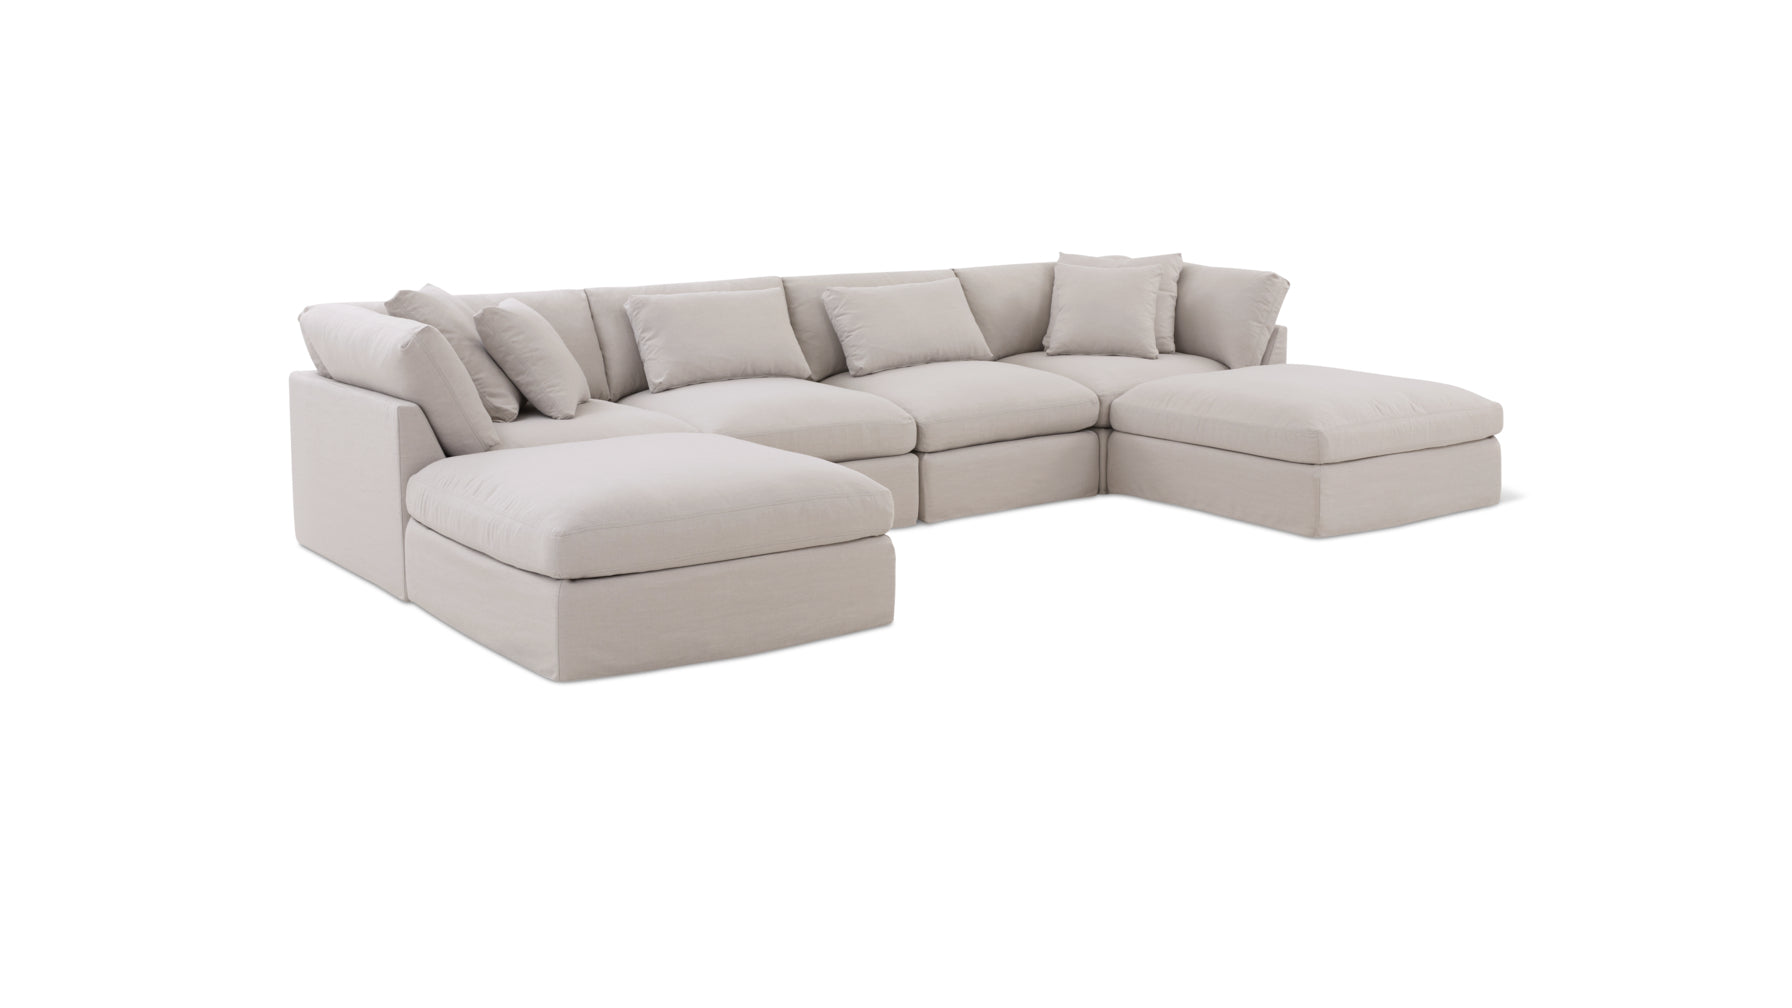 Get Together™ 6-Piece Modular U-Shaped Sectional, Large, Clay - Image 2